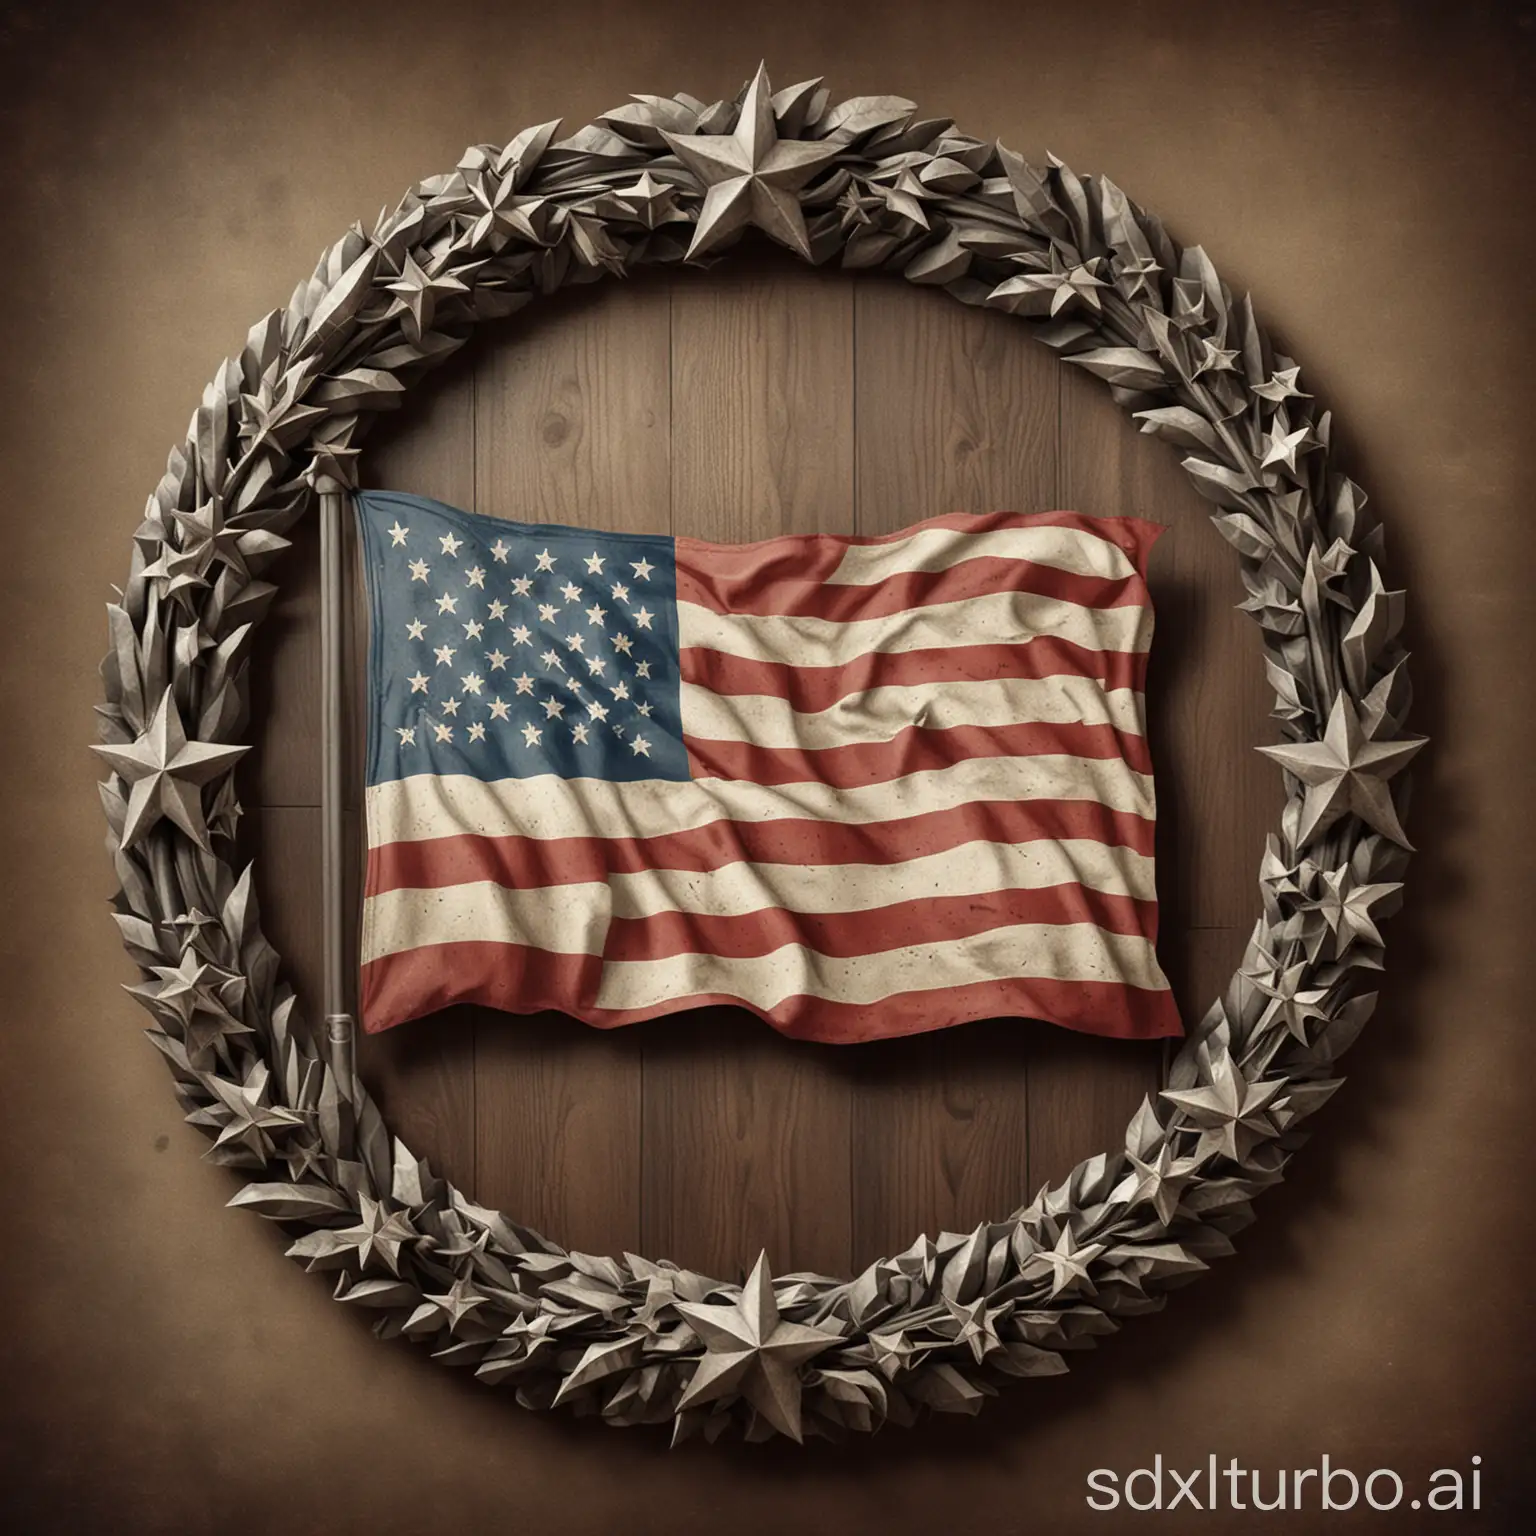 Patriotic-American-Flag-Logo-Design-with-Stars-and-Stripes-Wreath